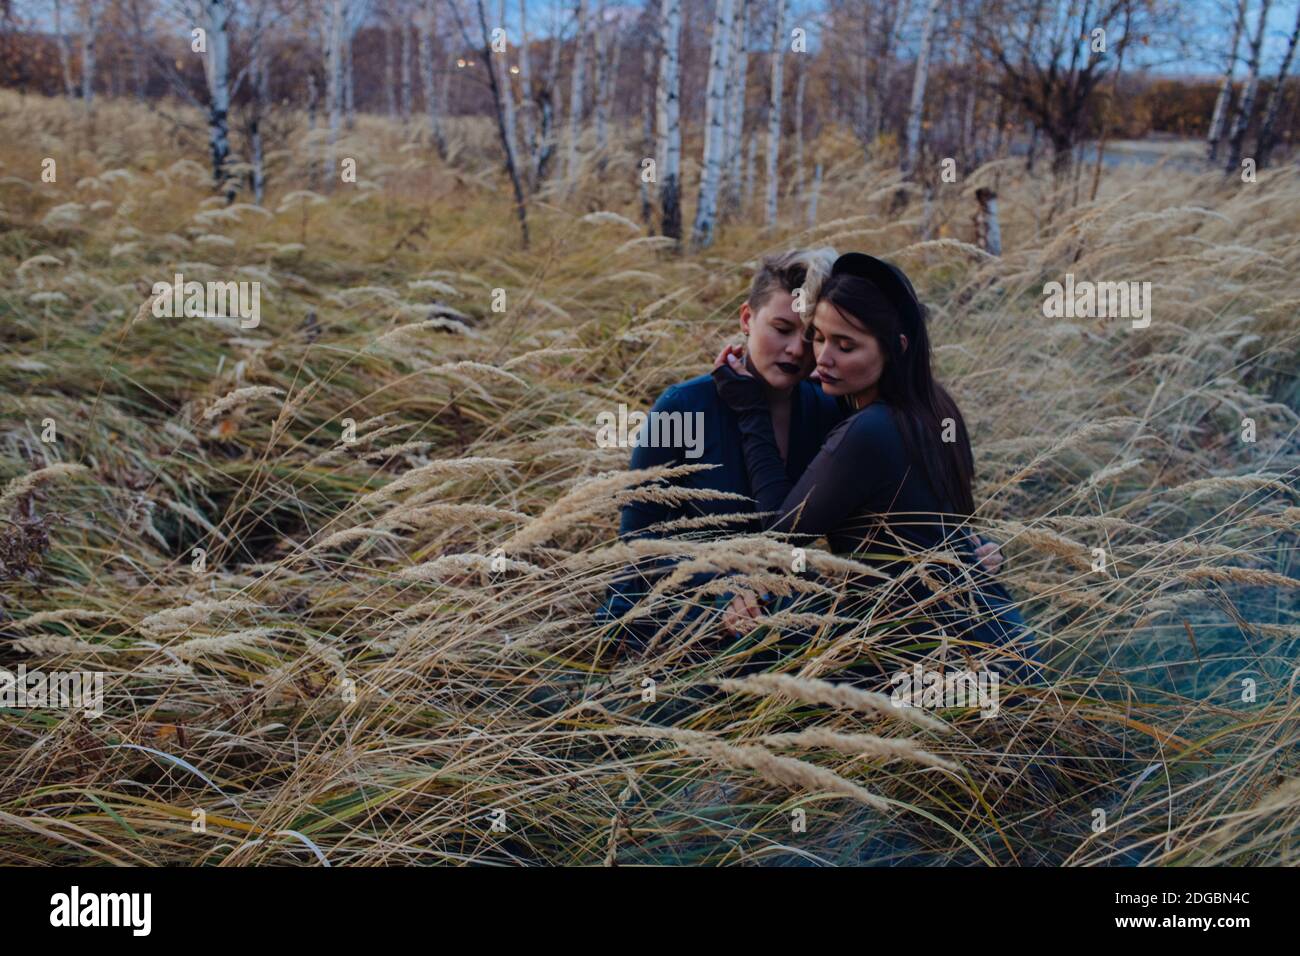 Portrait of two women, embracing in a forest, Russia Stock Photo